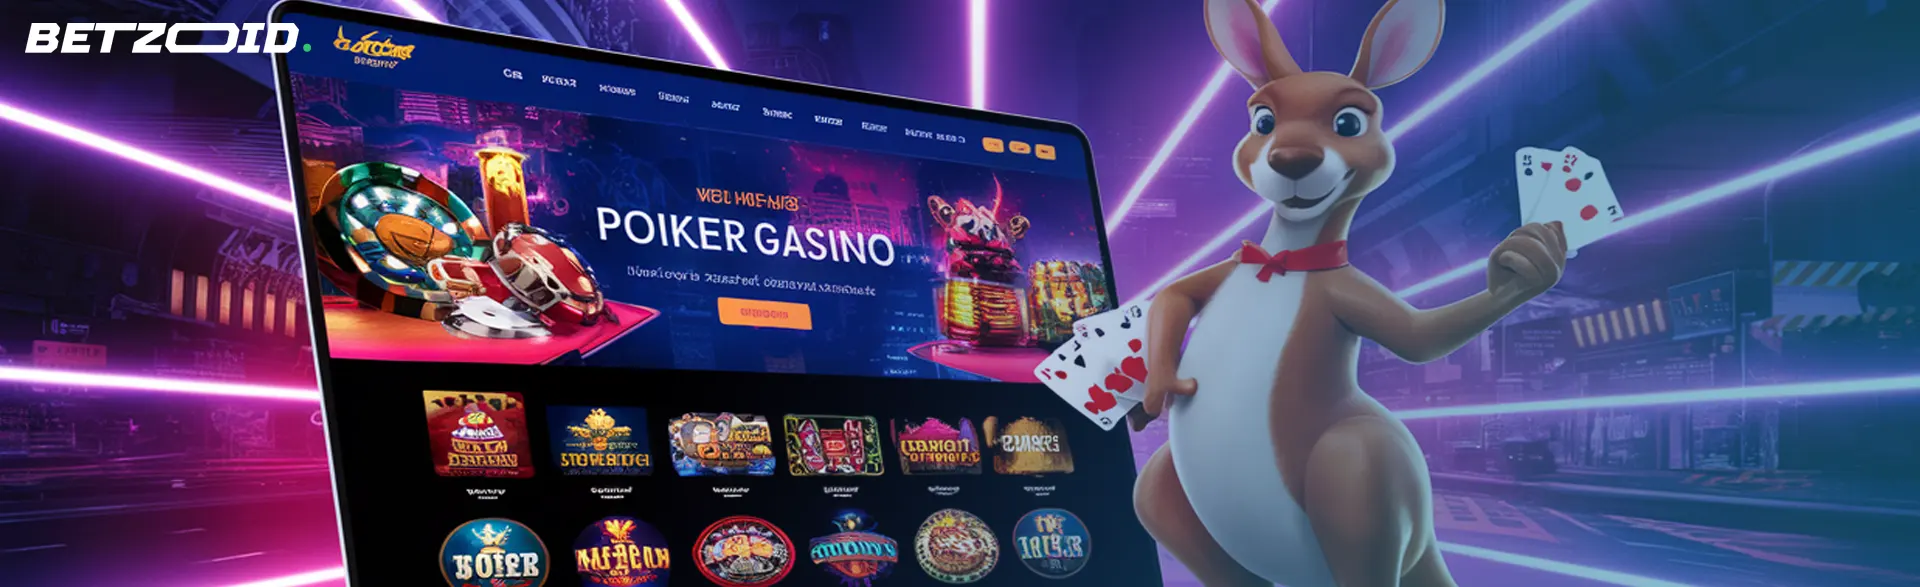 Latest games at new online casinos.